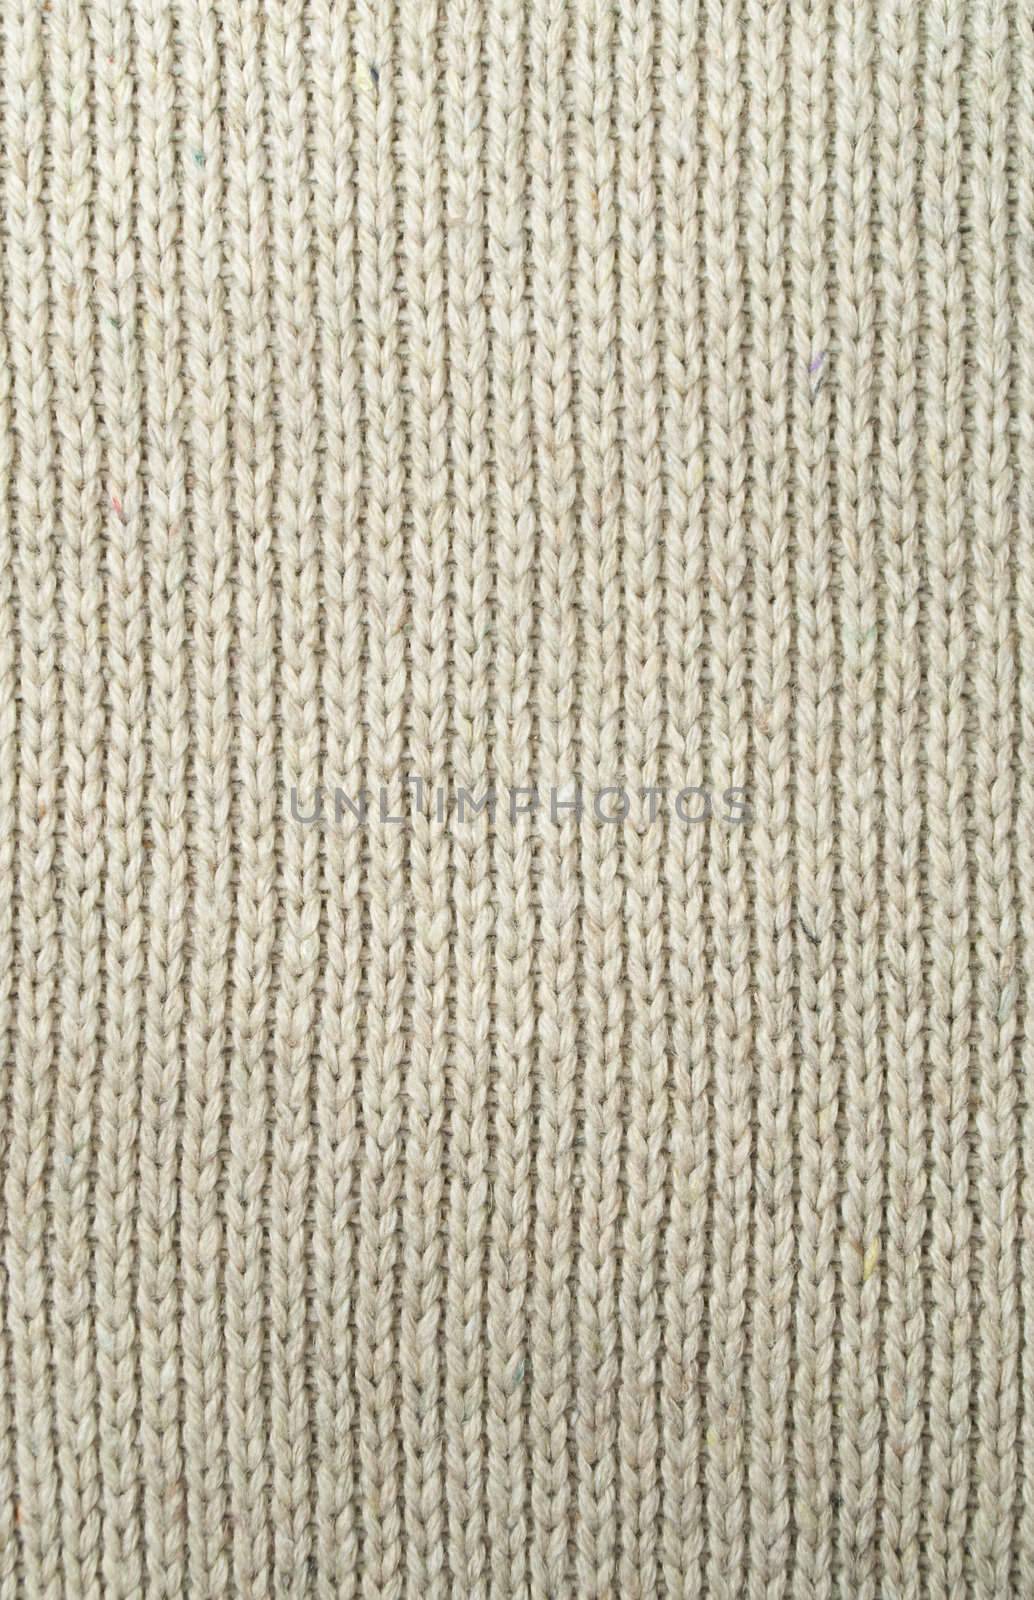 woolen knitted sweater of beige color